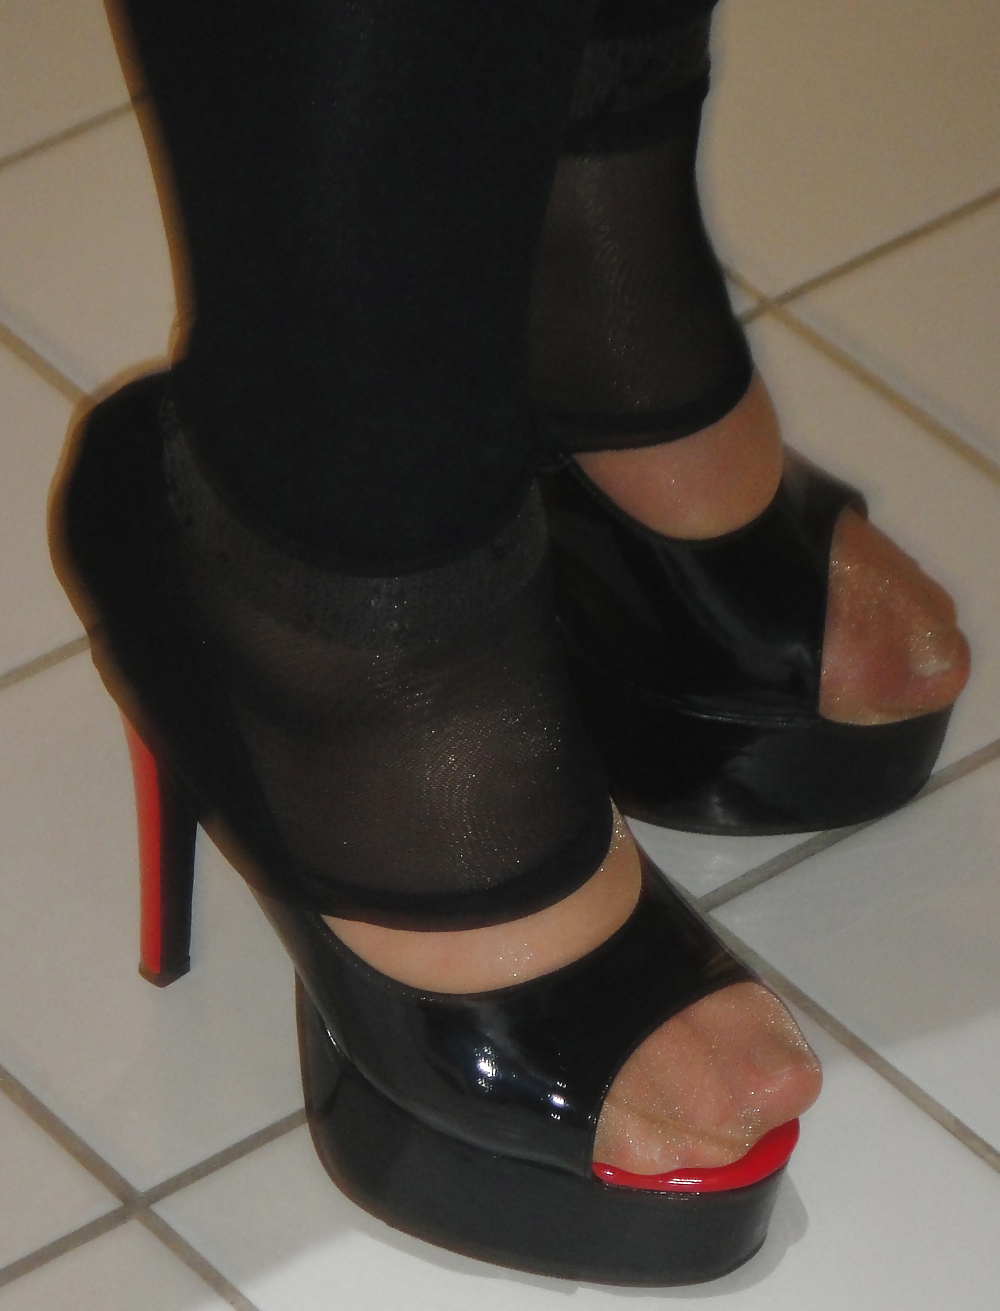 New pantyhose, new shoes and a NEW TOY #7152966